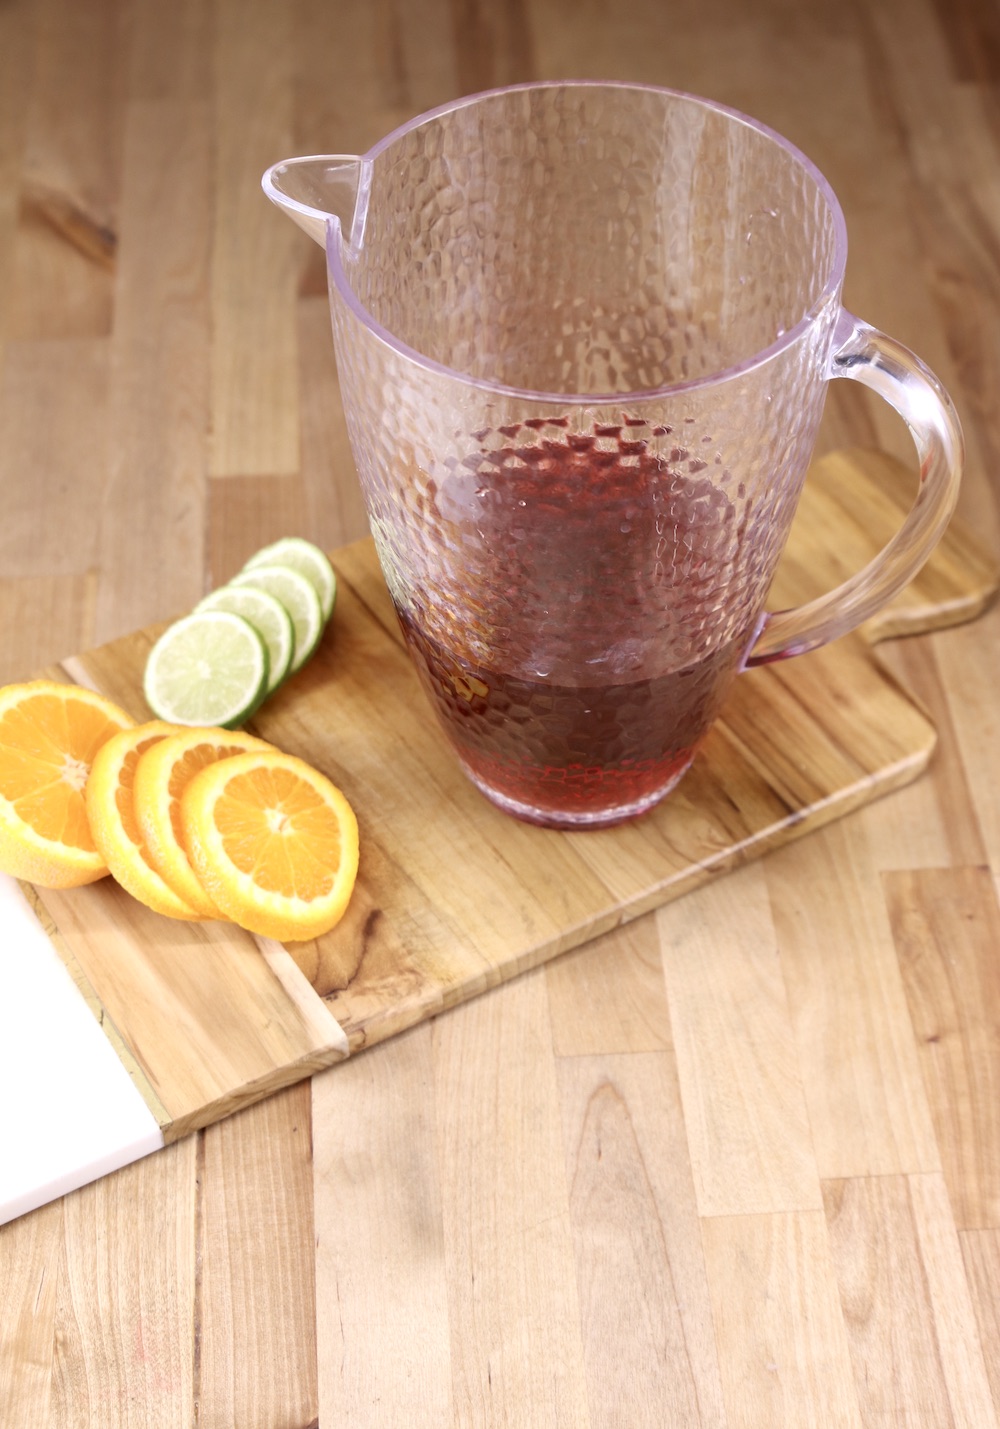 Pitcher with cranberry juice on a wood board with sliced oranges and limes